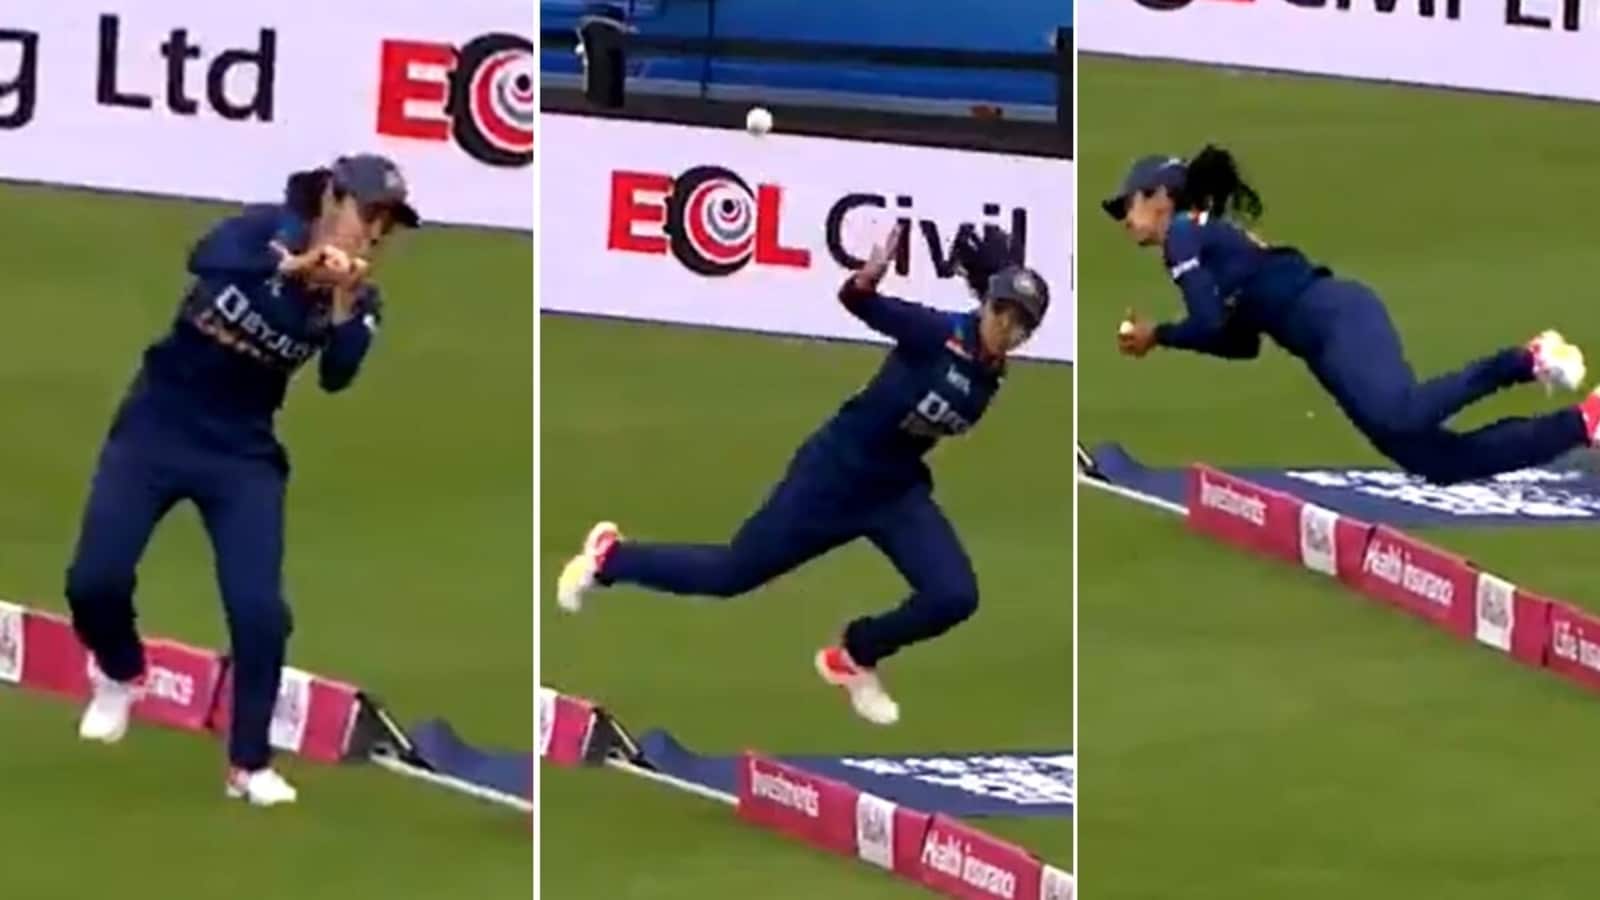 India S Harleen Deol Takes One Of The Most Jaw Dropping Catches